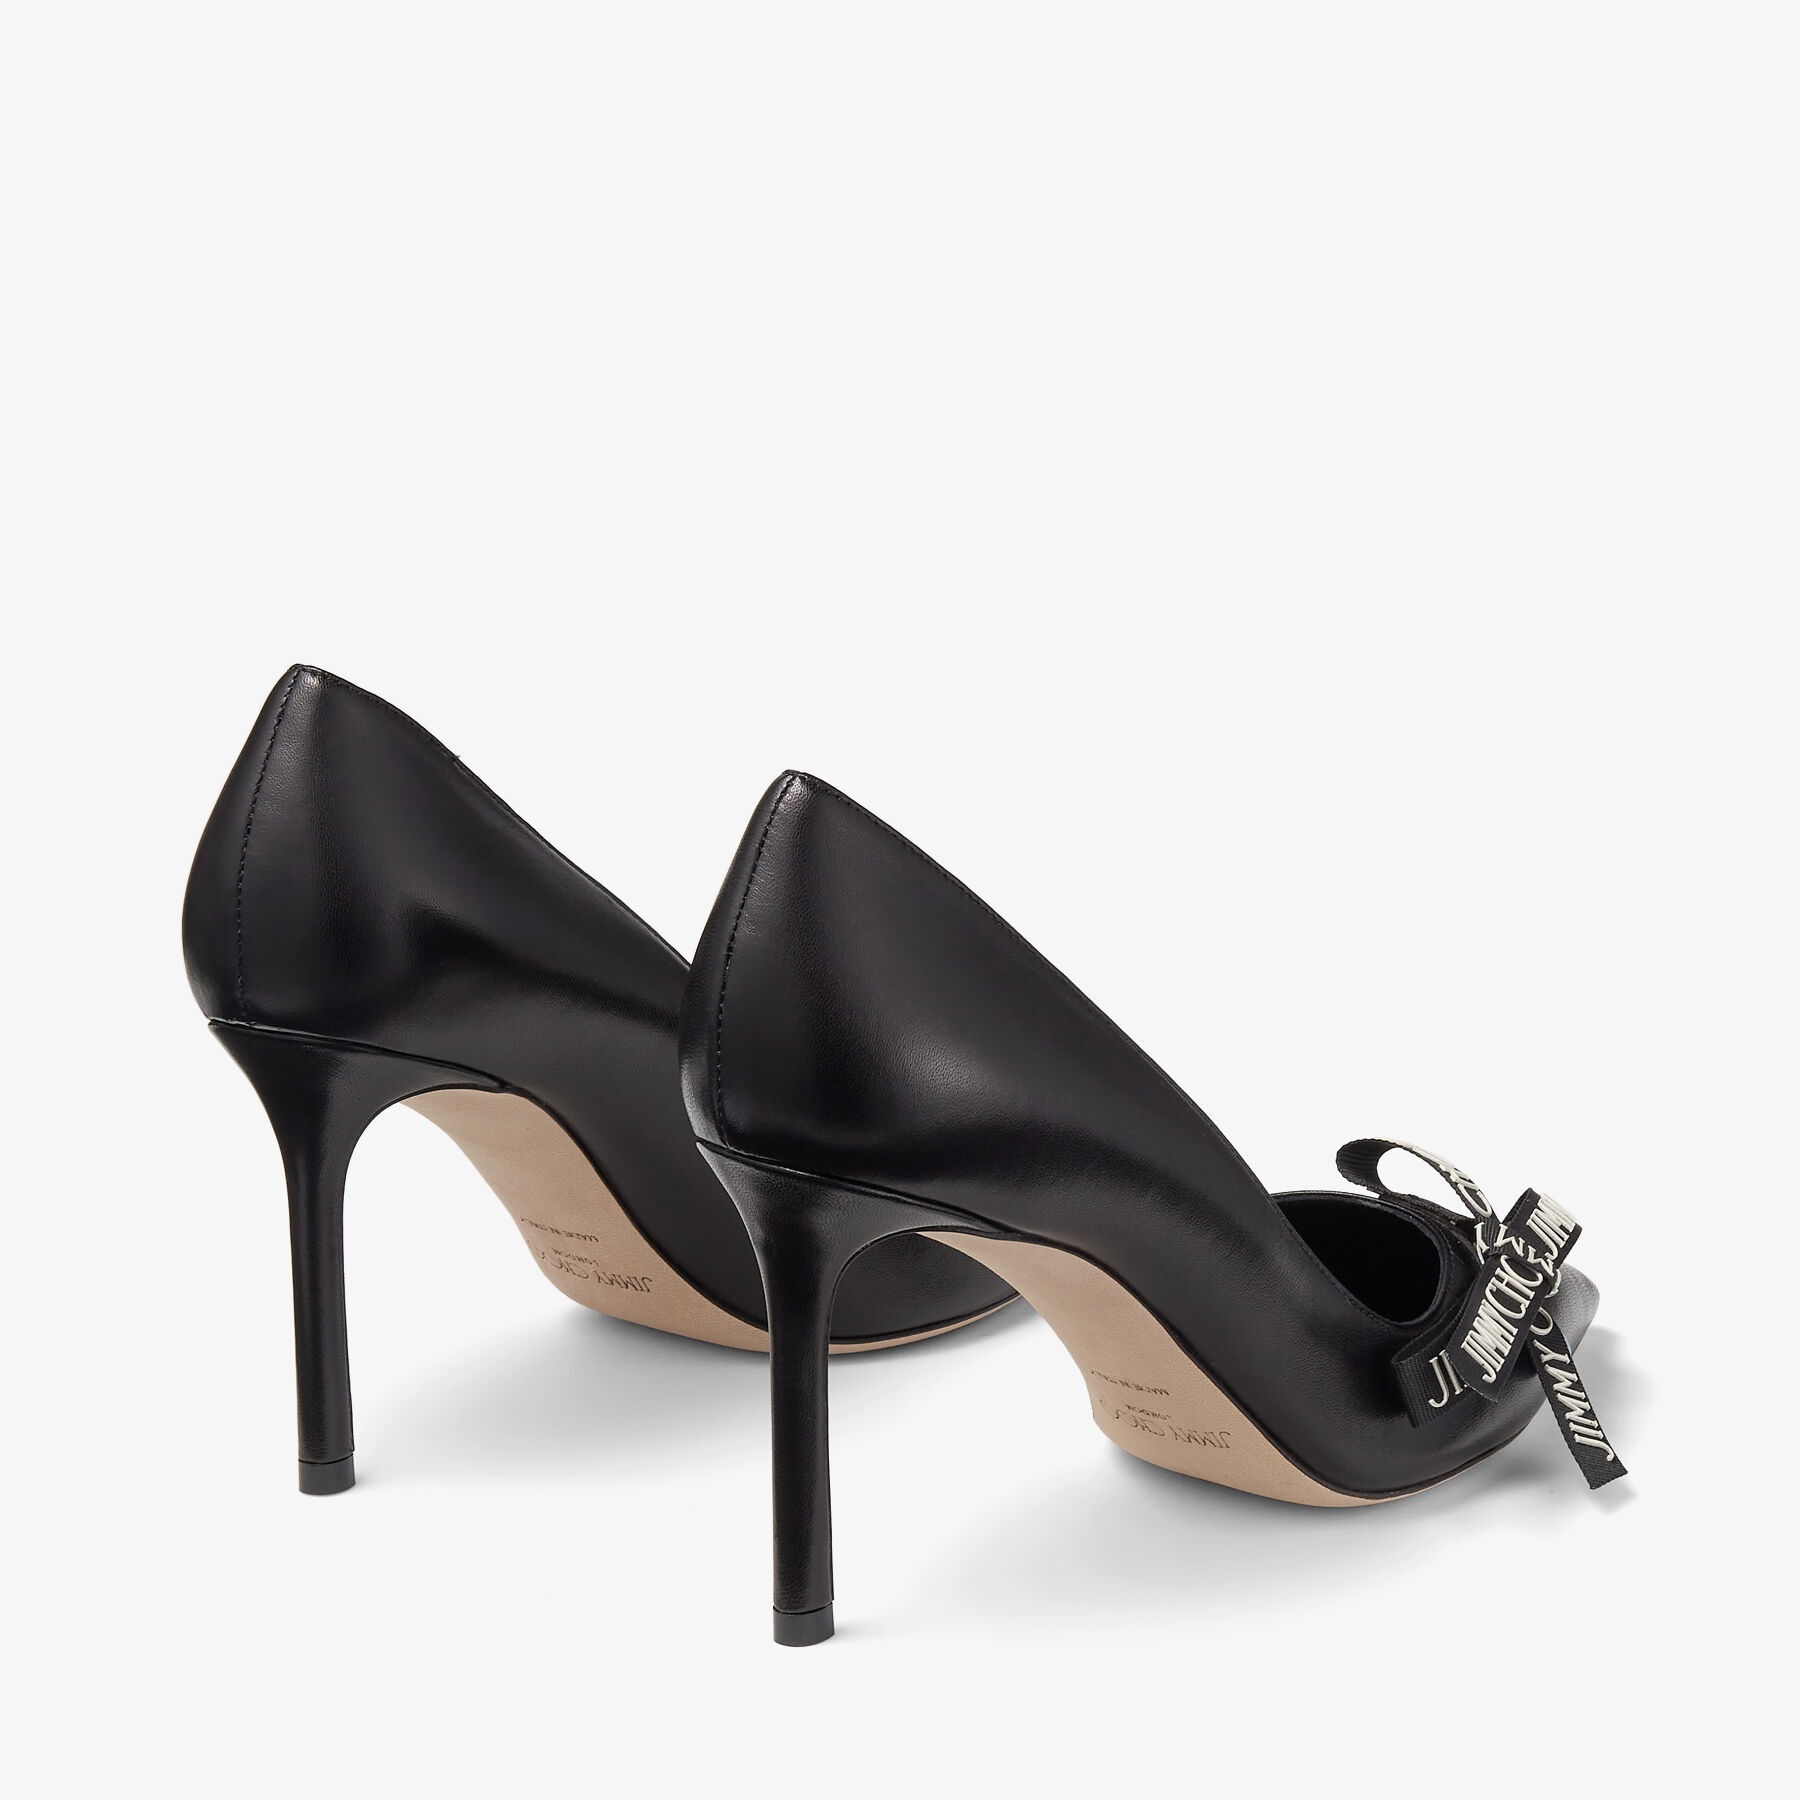 Romy 85
Black Nappa Leather Pumps with Jimmy Choo Bow - 6